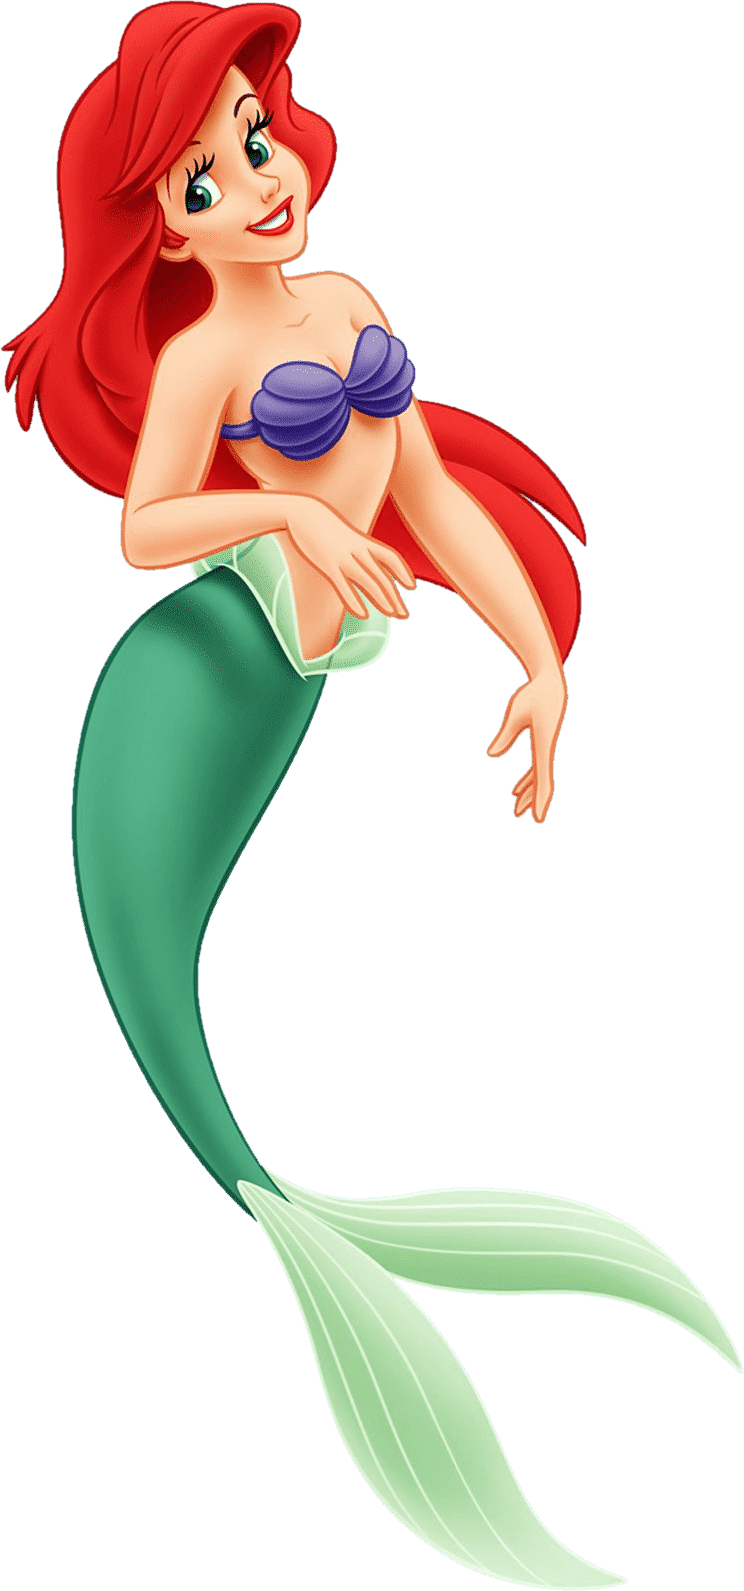 ariel-being-different-lesson-for-kids